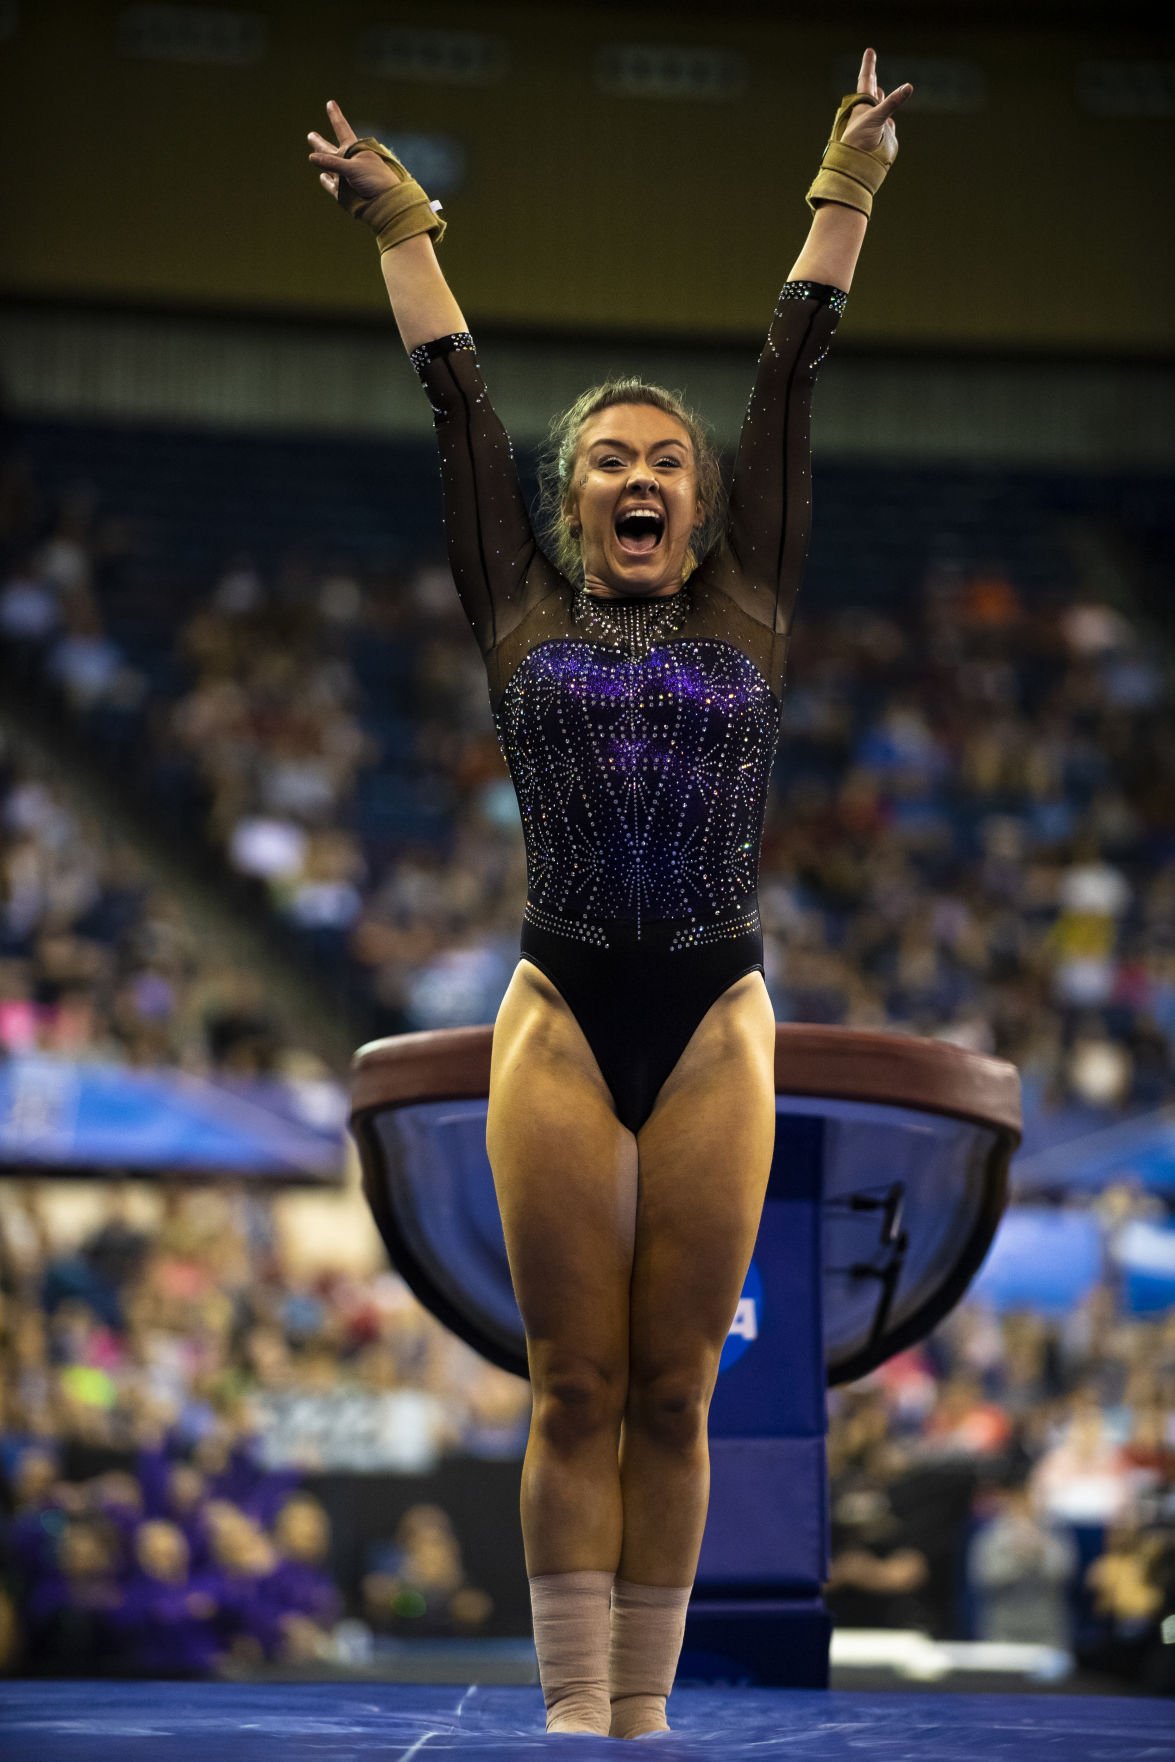 Lsu Gymnastics Places Second In The 2019 Ncaa Women S Gymnastics Championships Daily